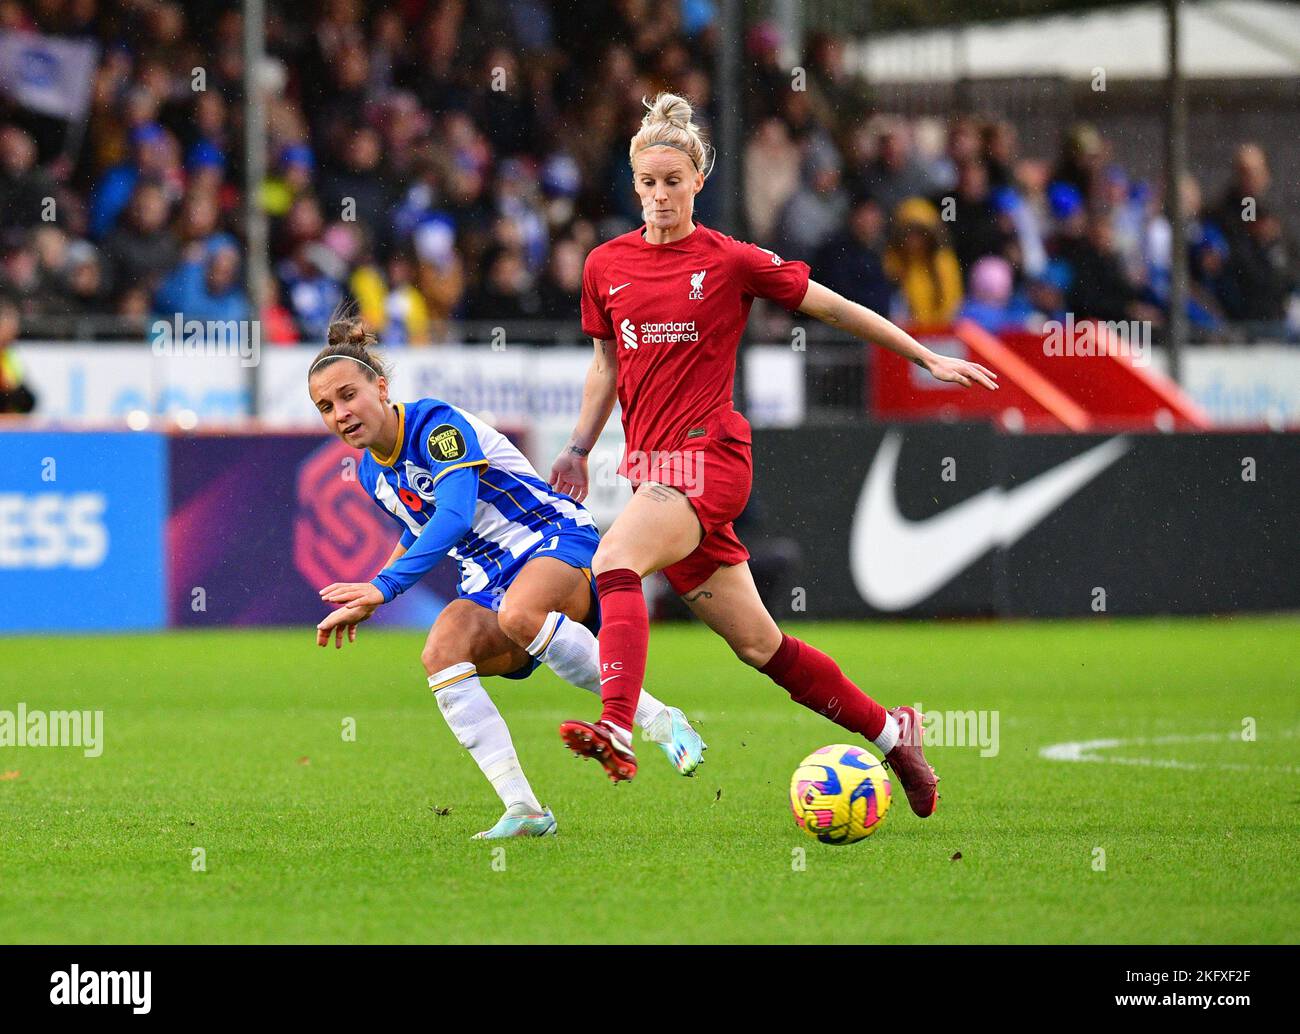 Crawley, UK. 20th Nov, 2022. Jasmine Matthews of Liverpool fouls Julia Zigiotti Olme of Brighton and Hove Albion resulting in a yellow card during the FA Women's Super League match between Brighton & Hove Albion Women and Liverpool Women at The People's Pension Stadium on November 20th 2022 in Crawley, United Kingdom. (Photo by Jeff Mood/phcimages.com) Credit: PHC Images/Alamy Live News Stock Photo